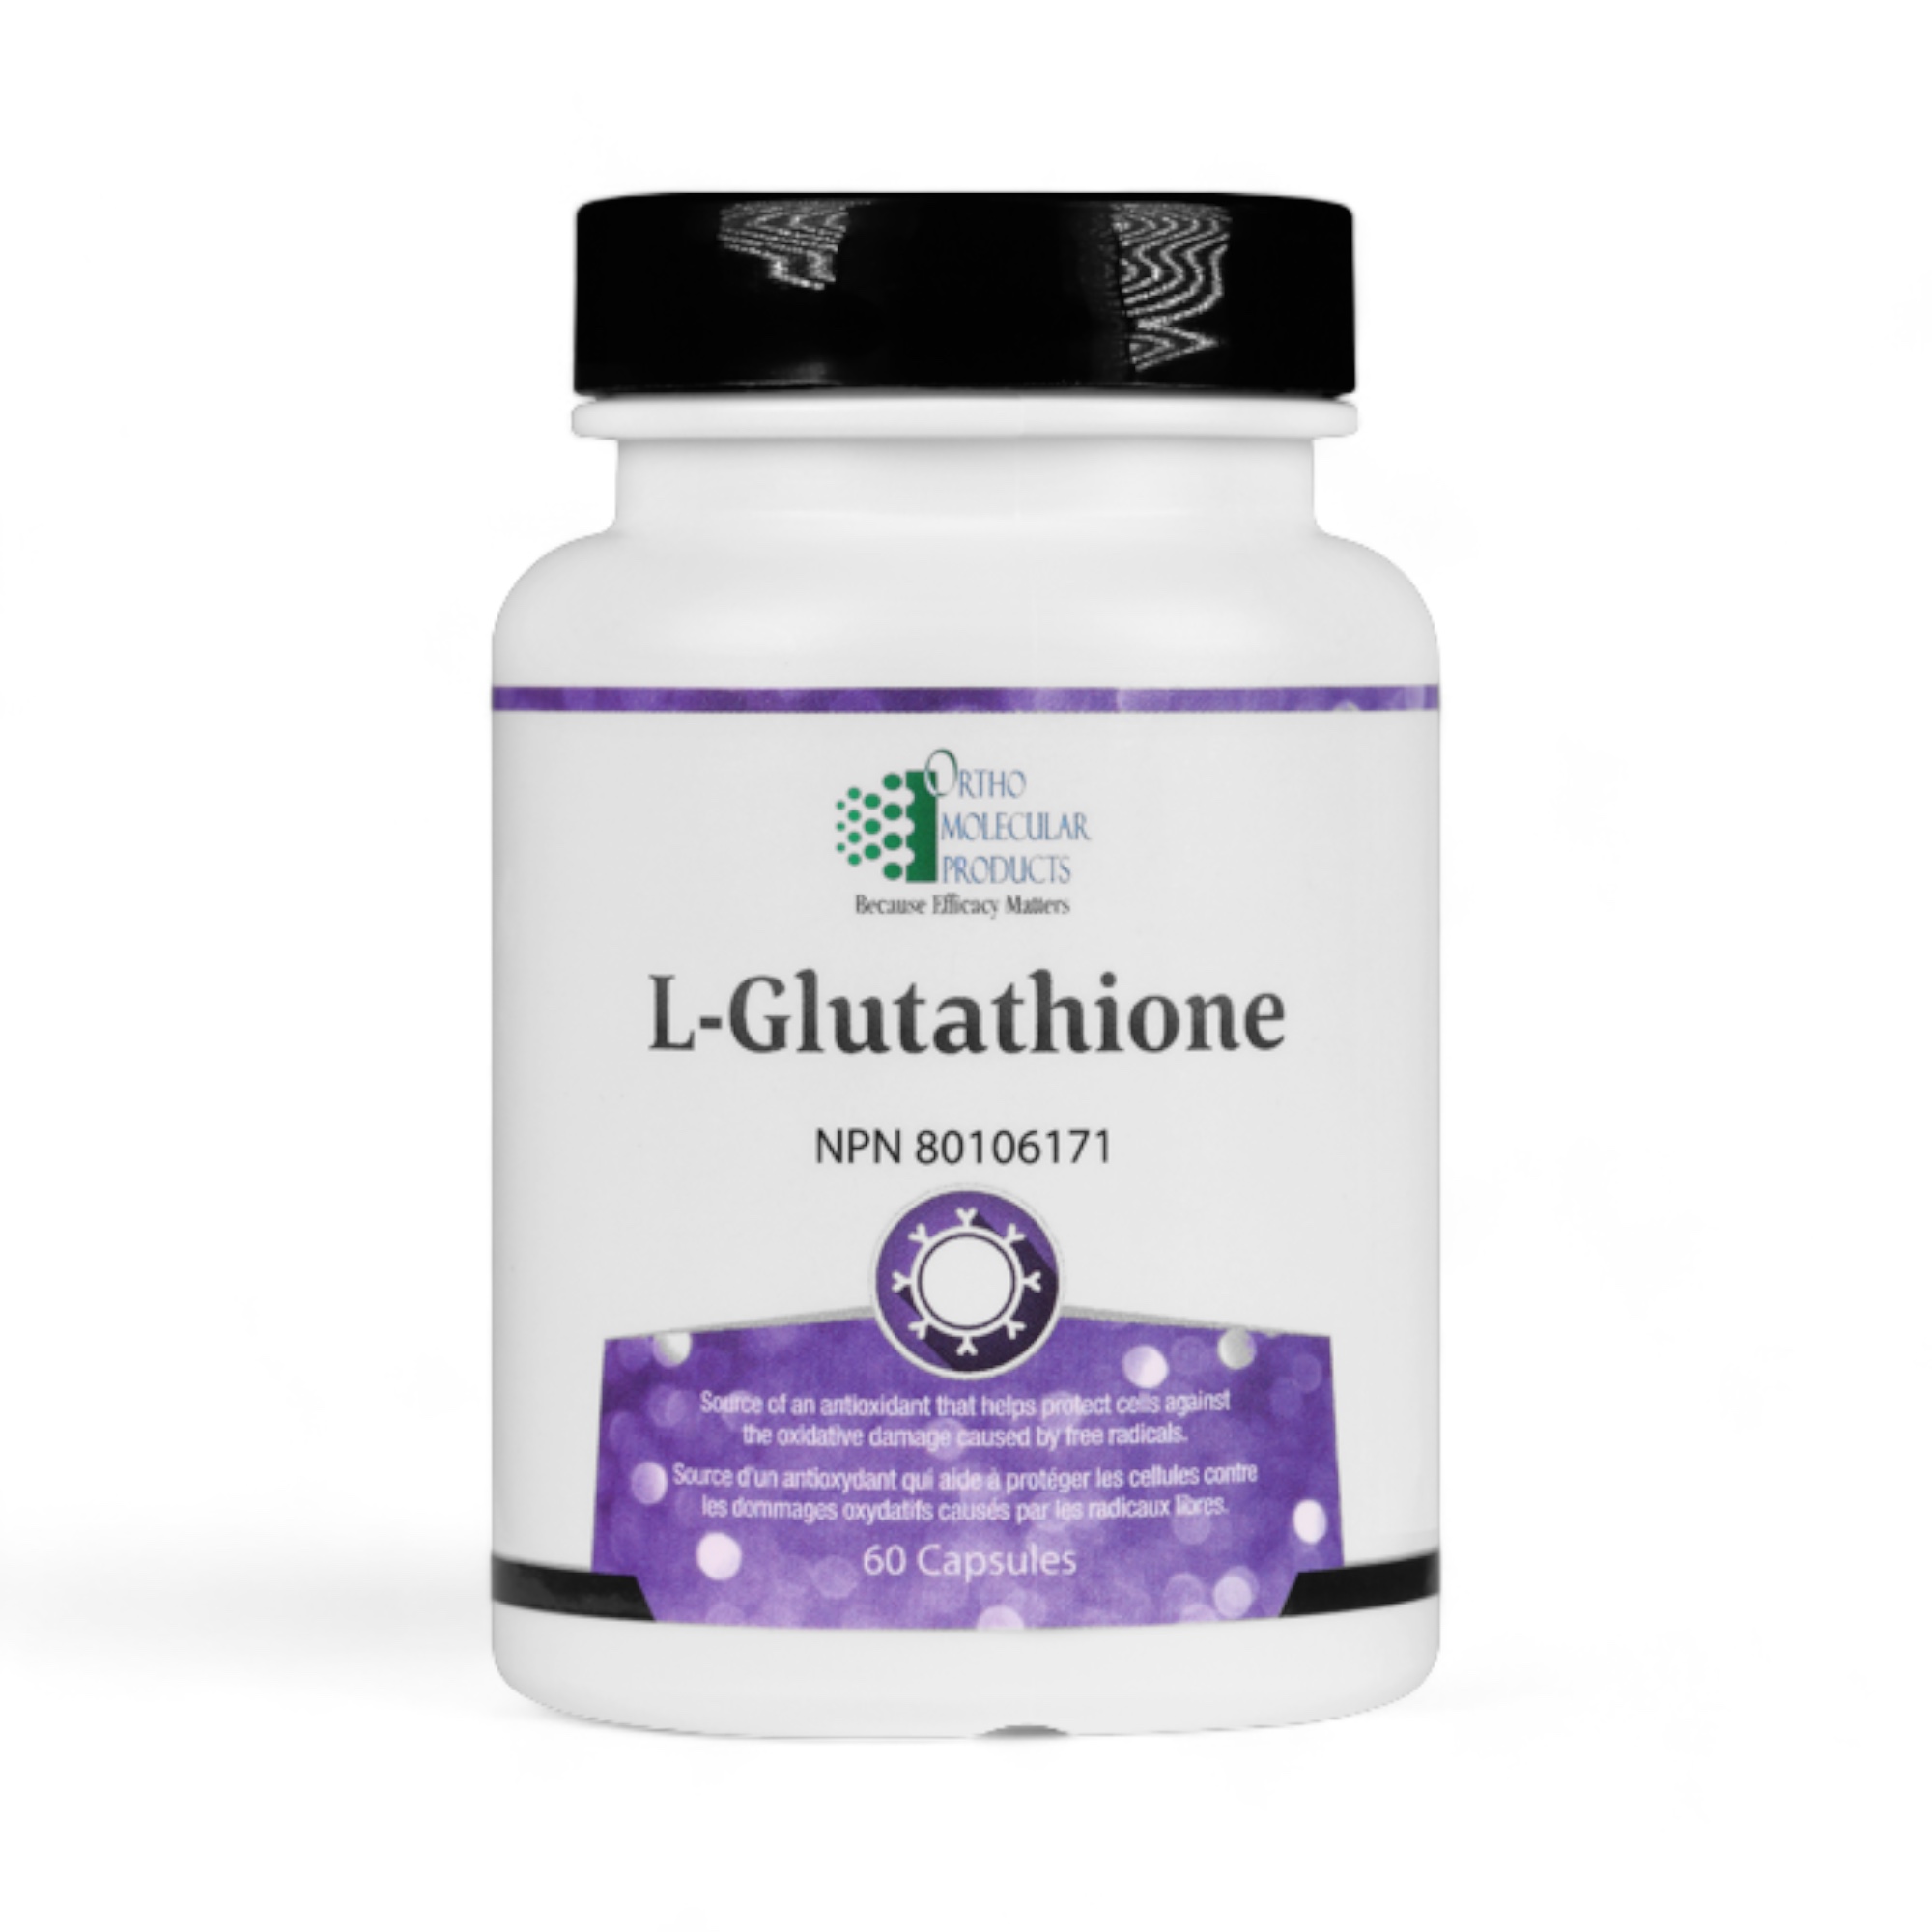 L-Glutathione 60 capsules Ortho Molecular Products